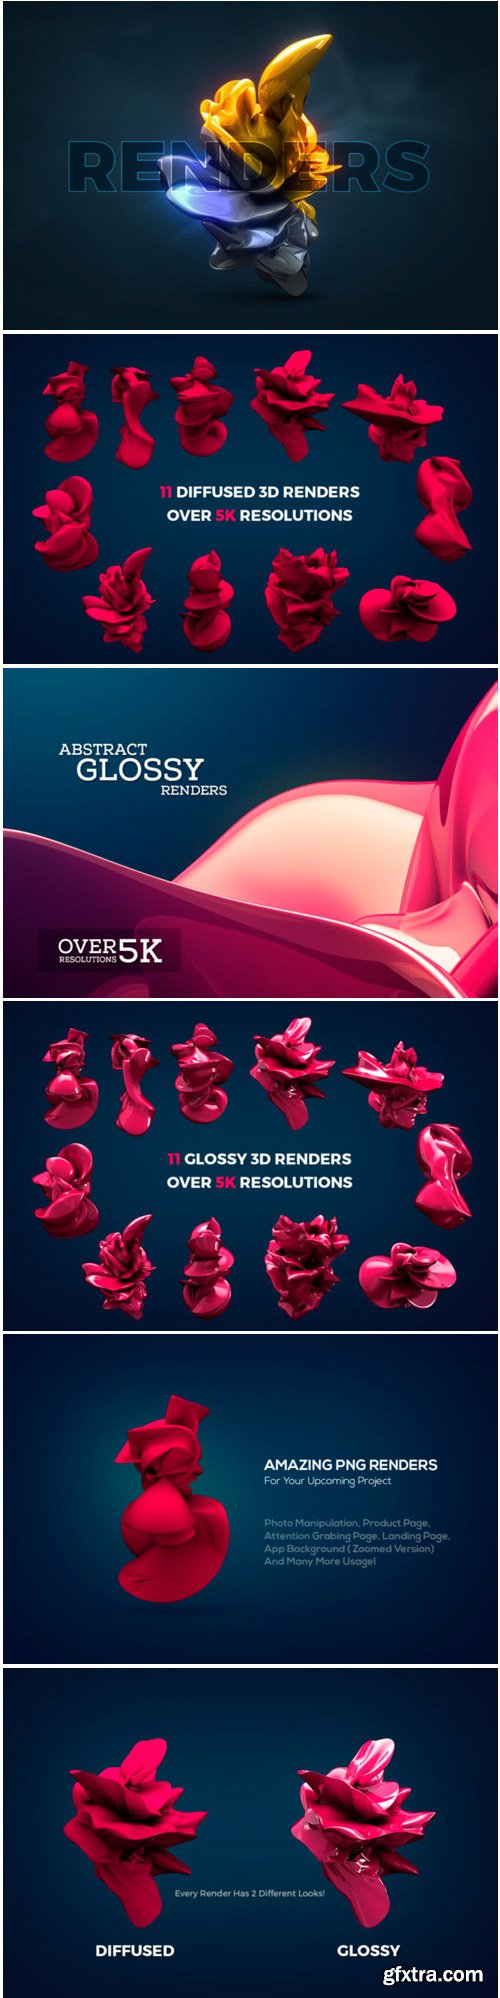 Abstract Glossy 3D Renders 1705572